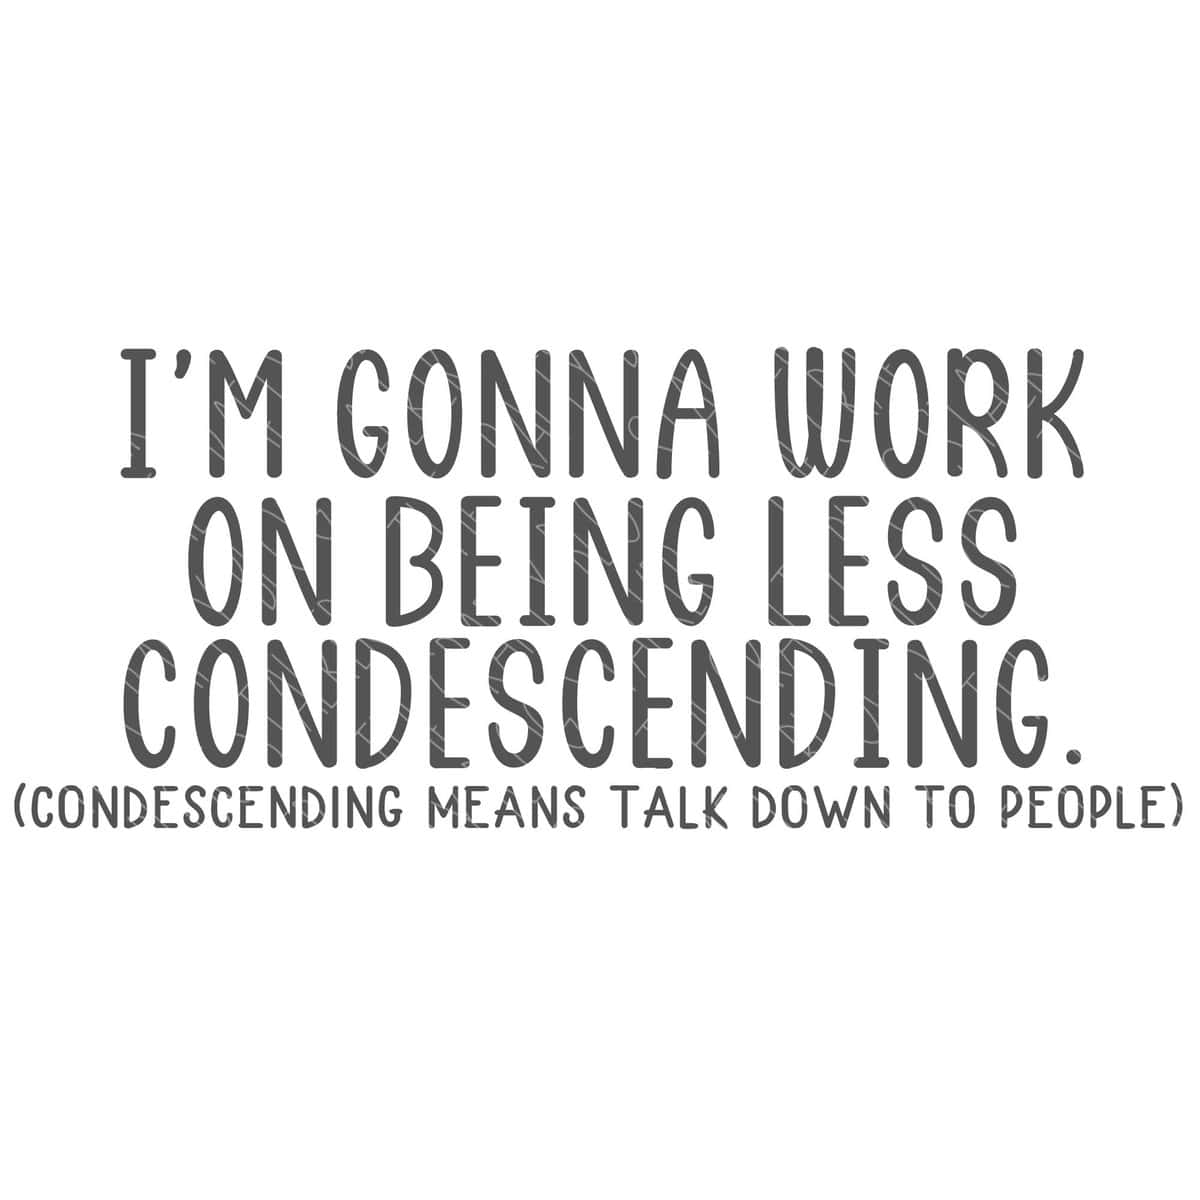 SVG Vector File: I'm Gonna Work On Being Less Condescending (condescending means talk down to people).